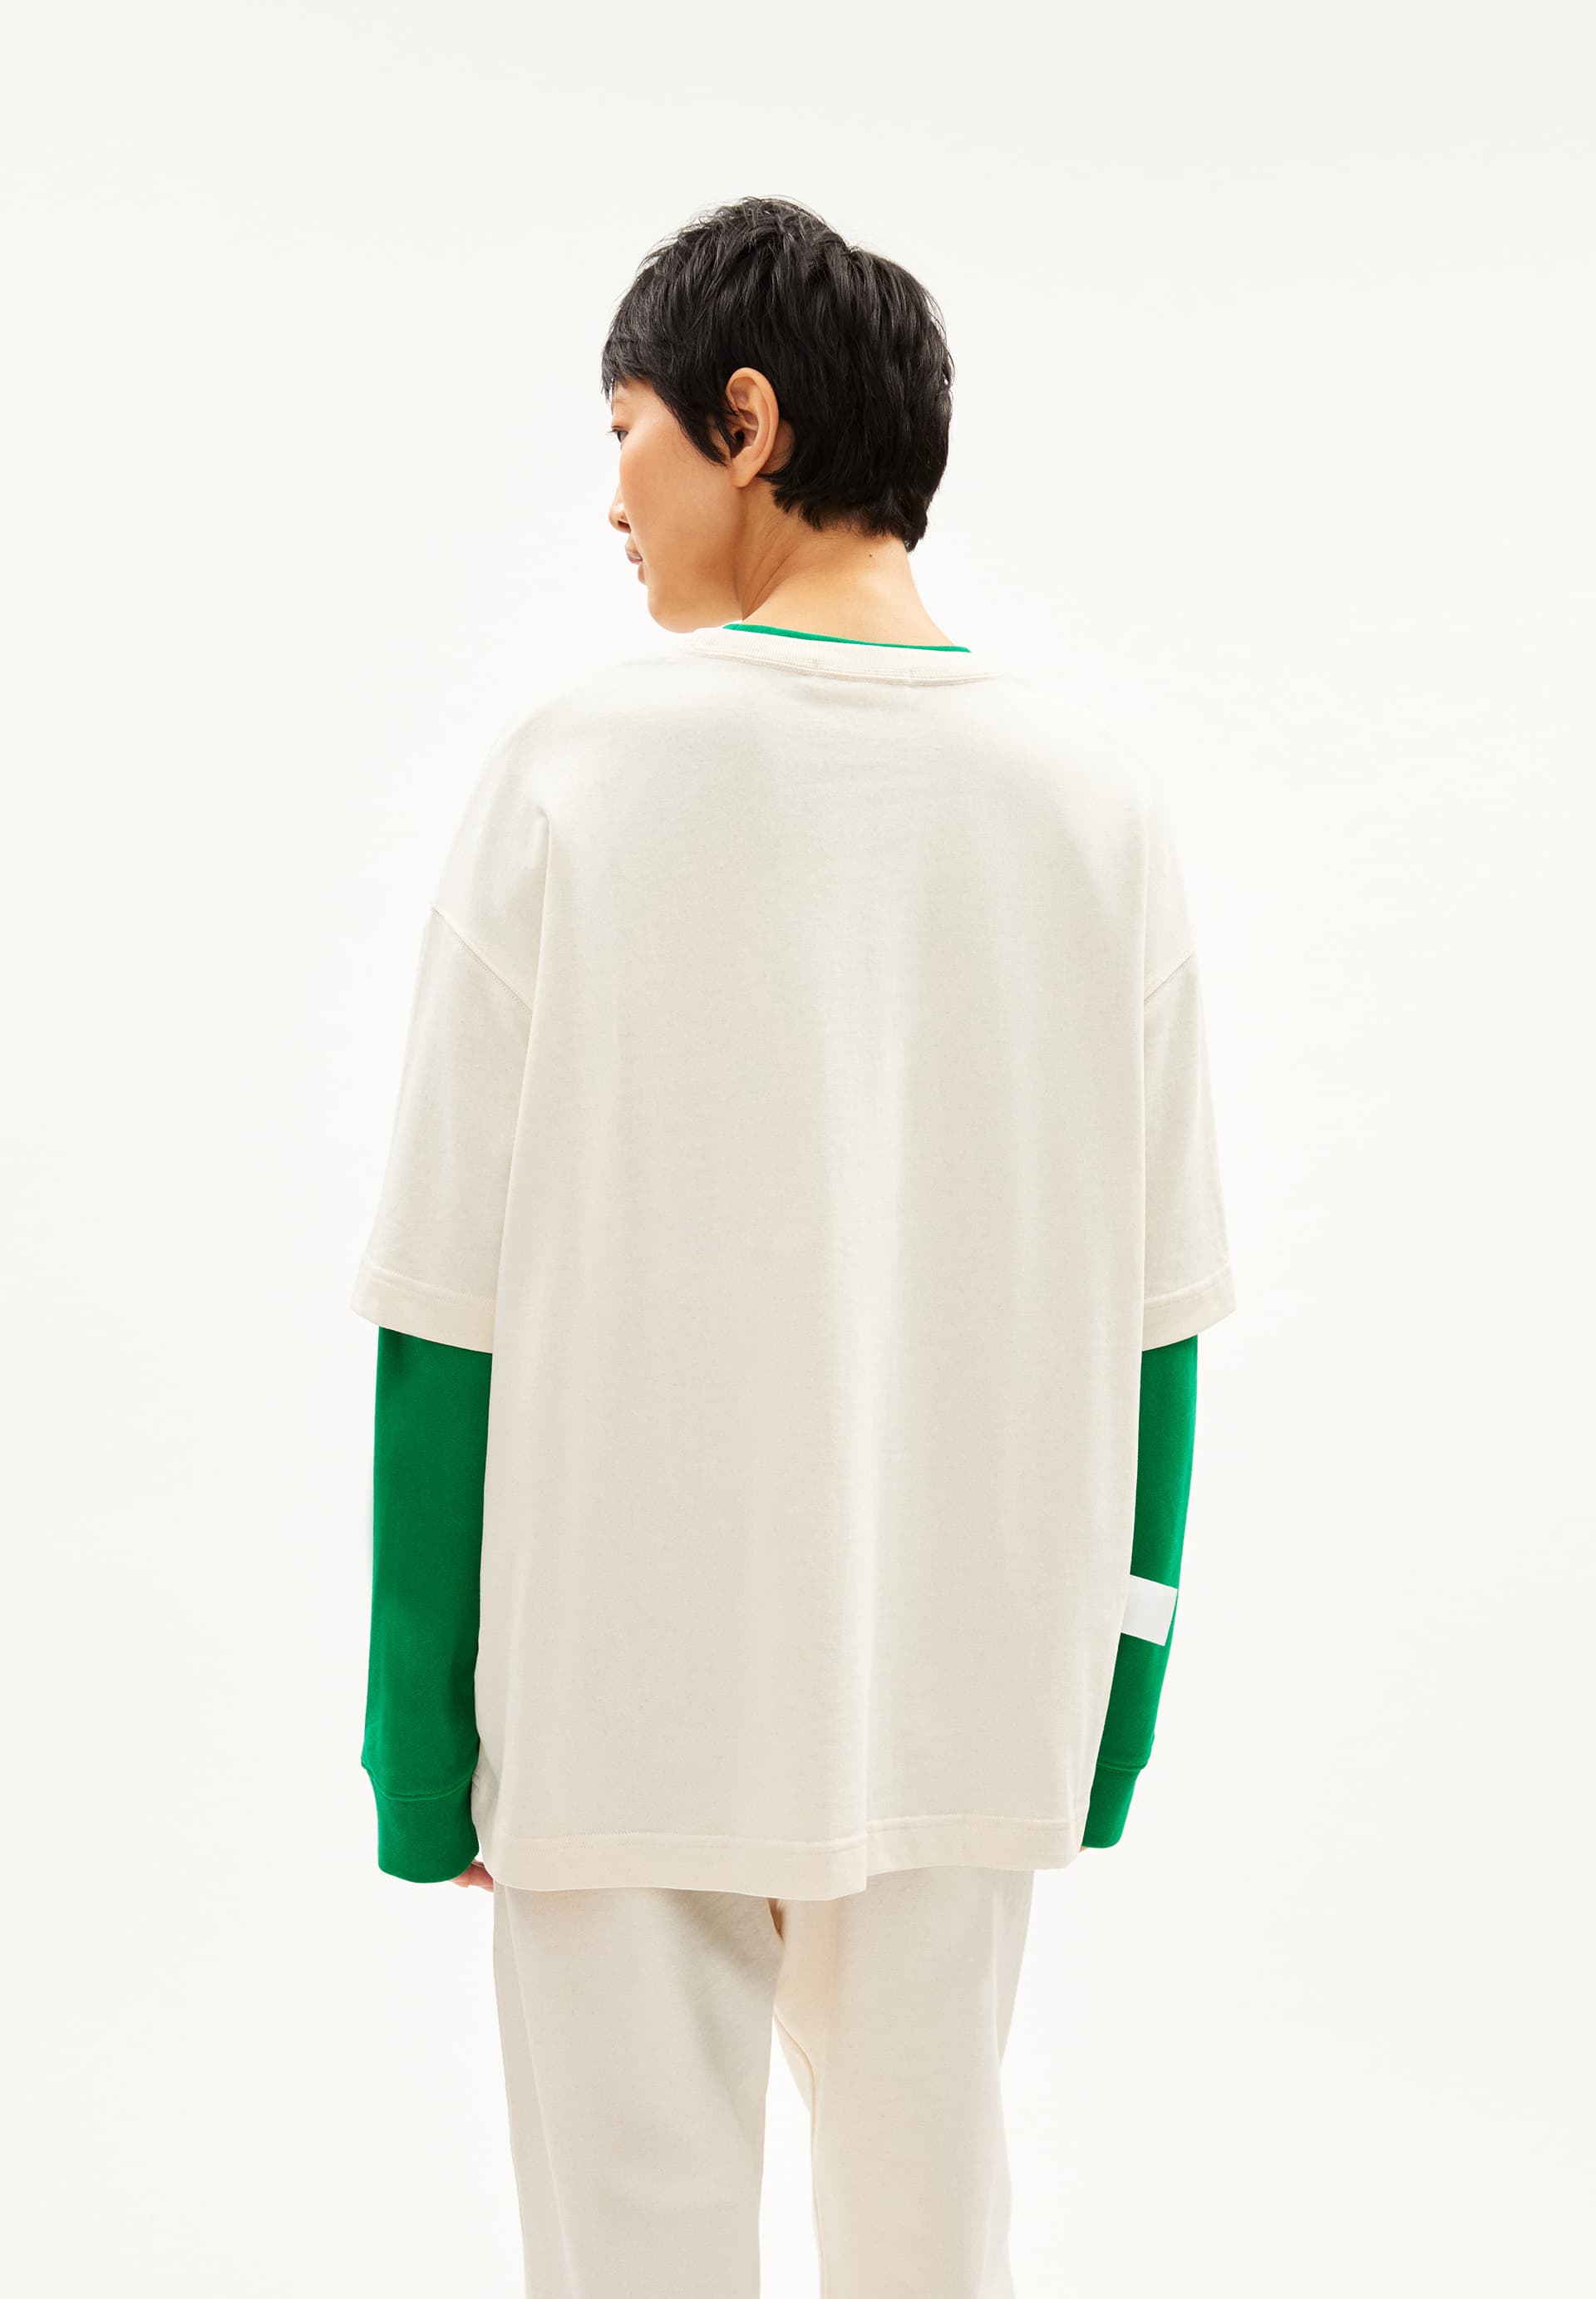 MIKAAS ICONIC CAPSULE Heavyweight T-Shirt Oversized Fit made of Organic Cotton Mix